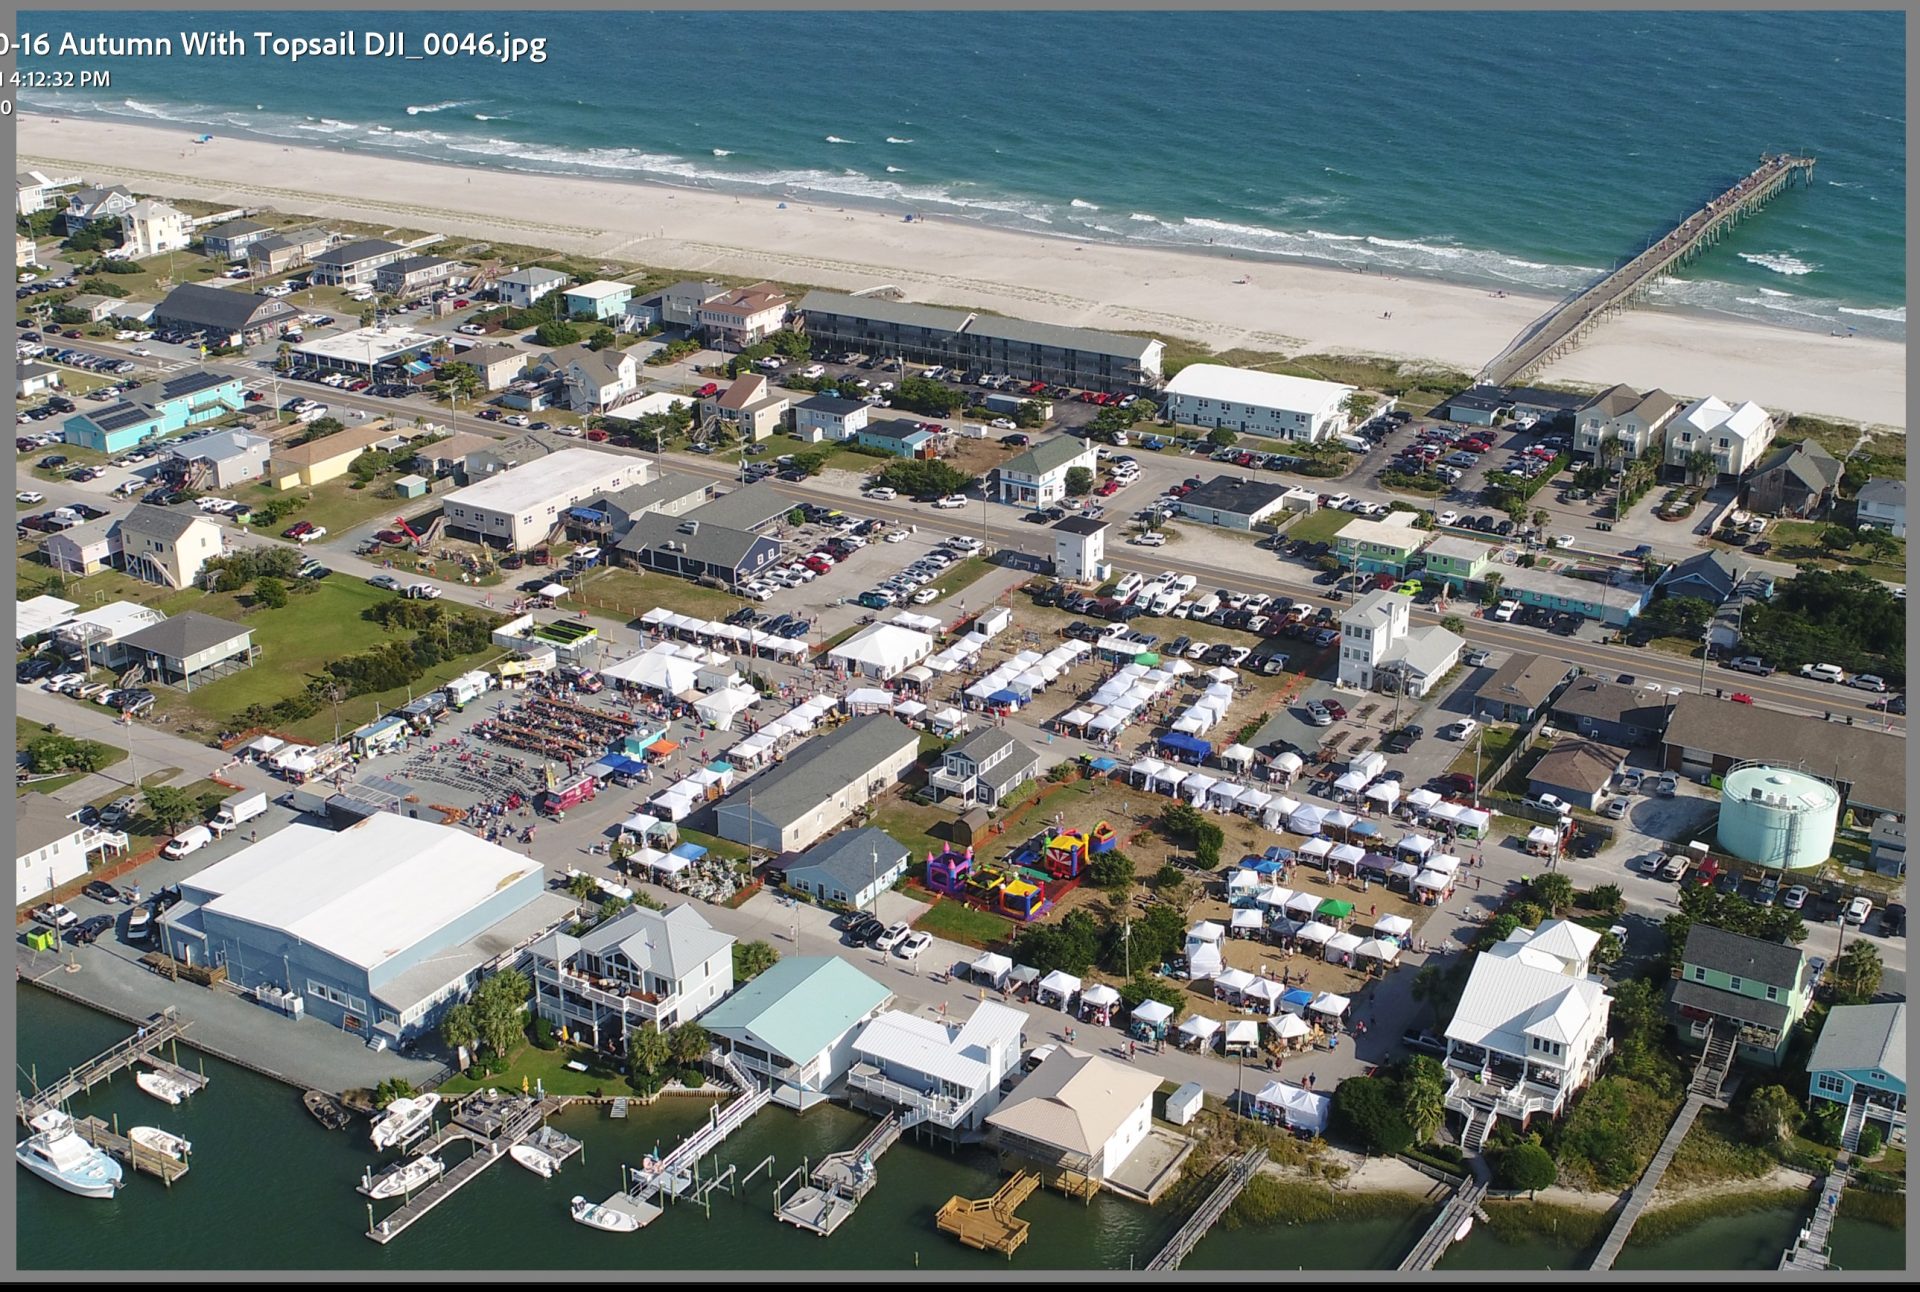 Autumn With Topsail Festival | Historical Society of Topsail Island